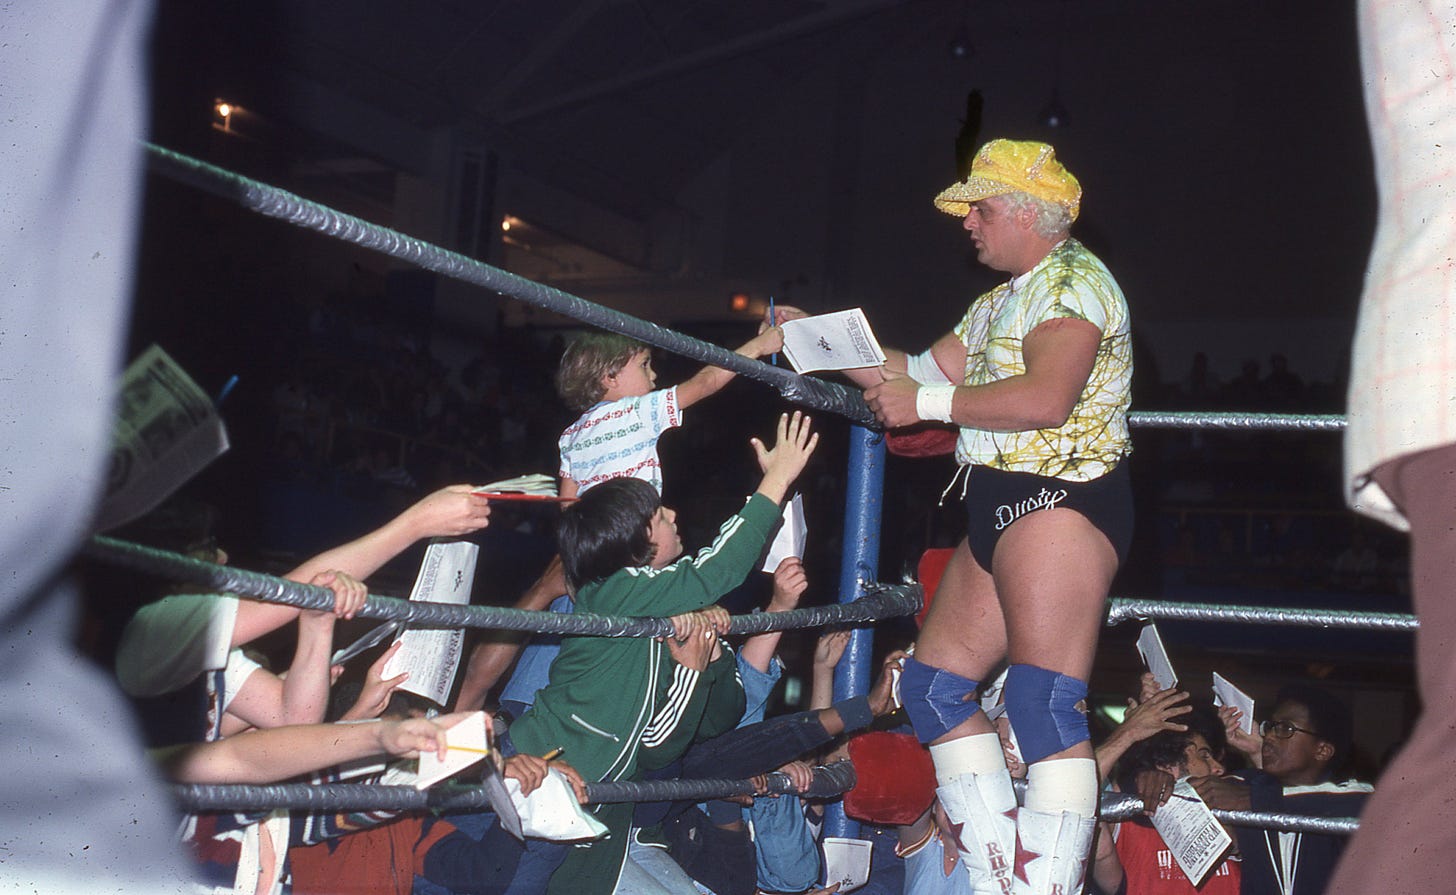 Dusty Rhodes signs autographs